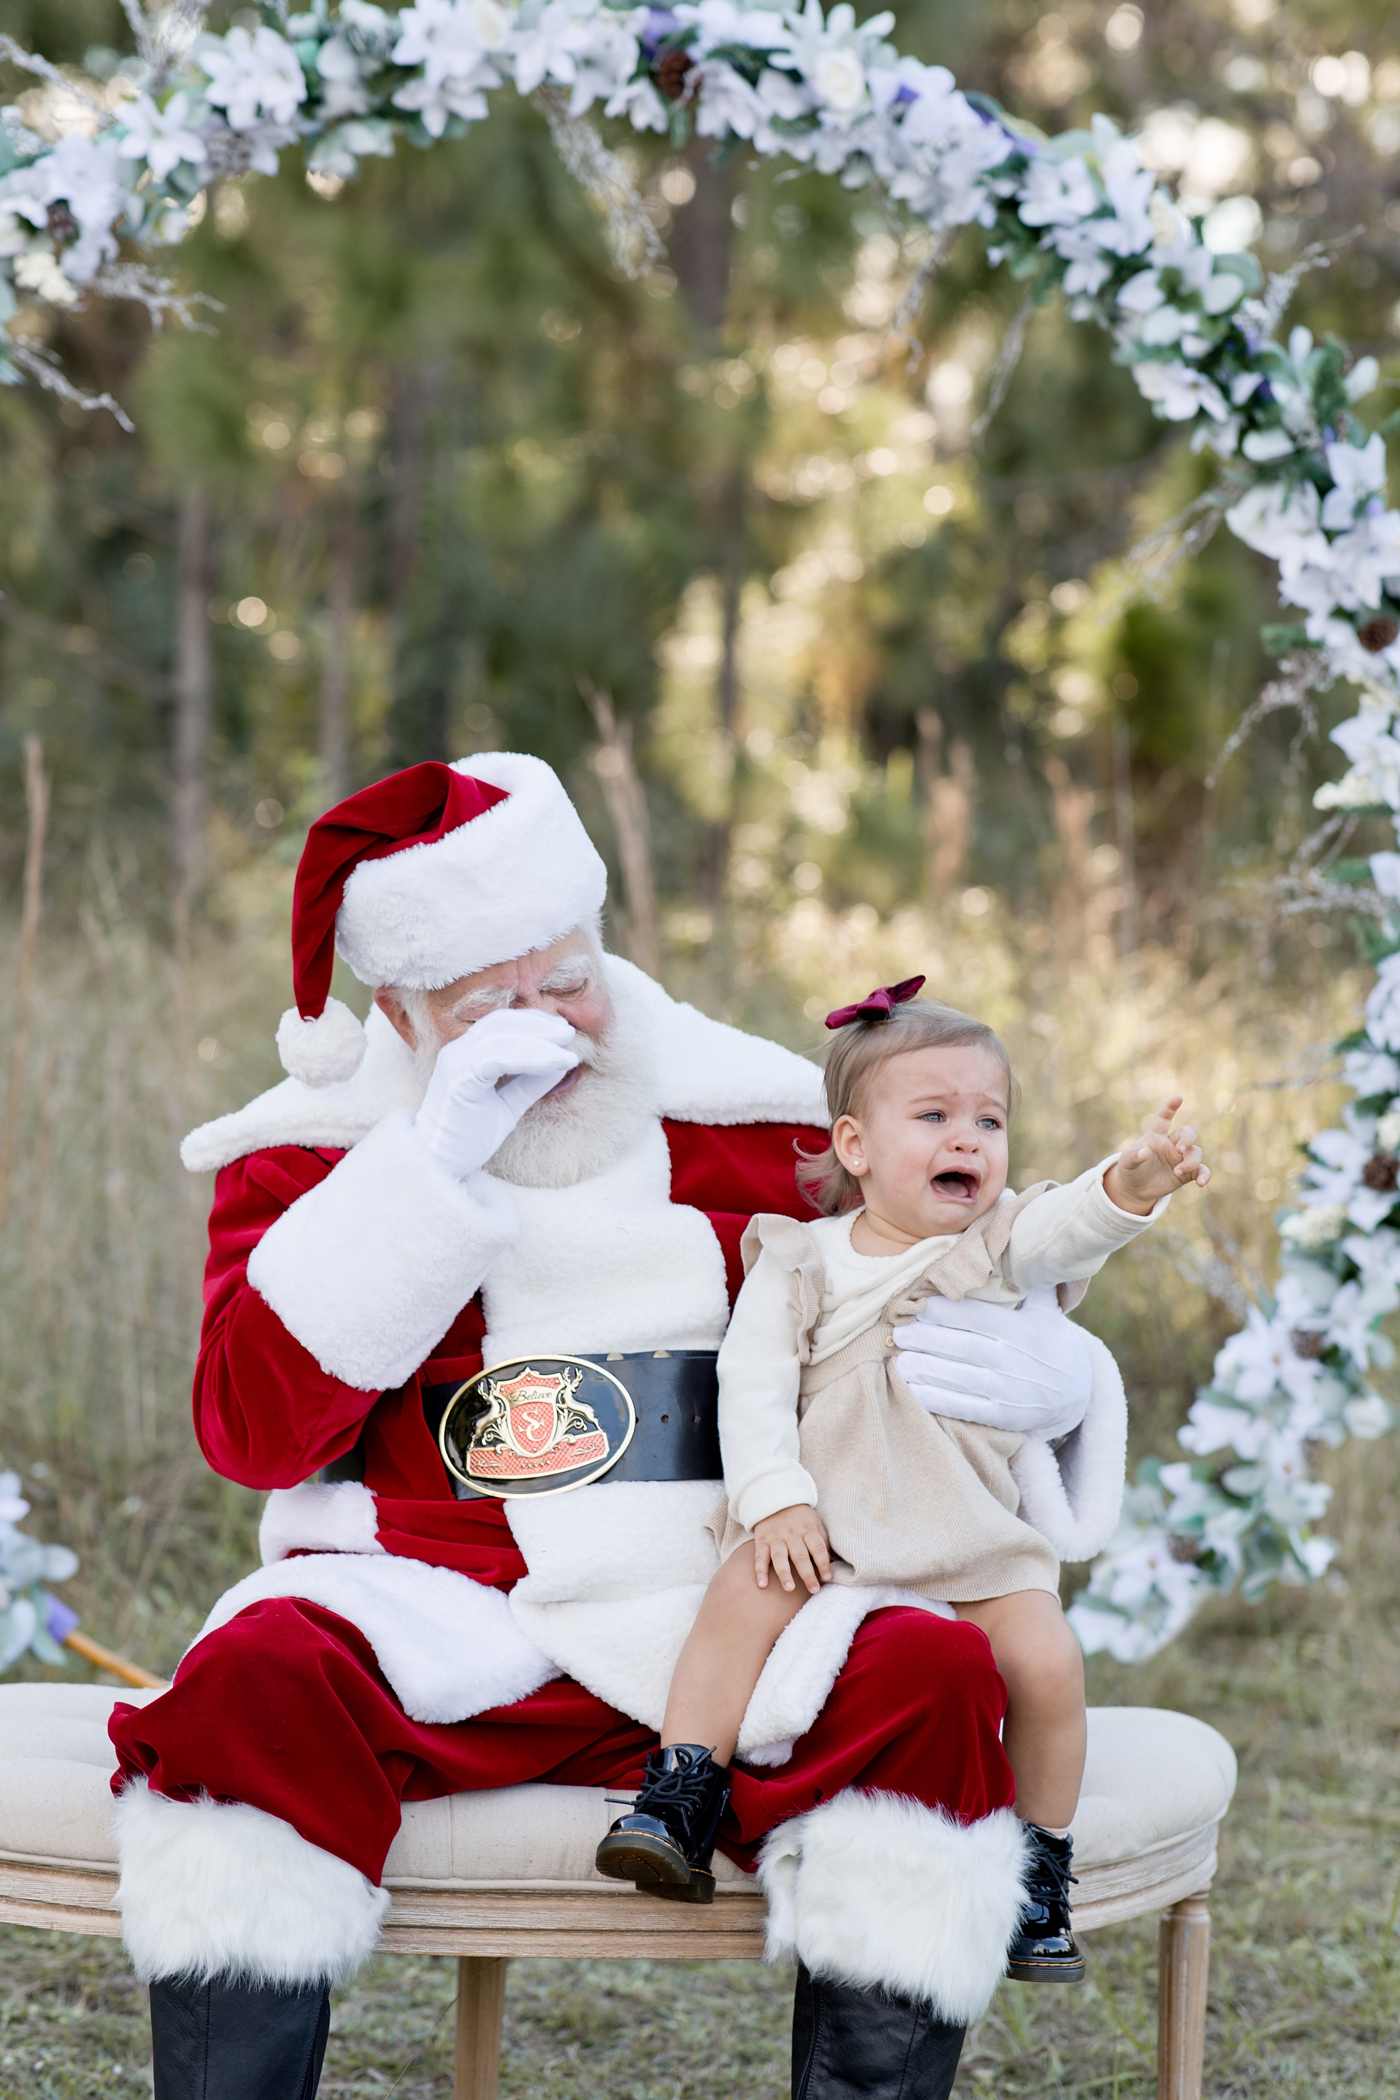 Santa and little girl cry together. Photo by Ivanna Vidal Photography.